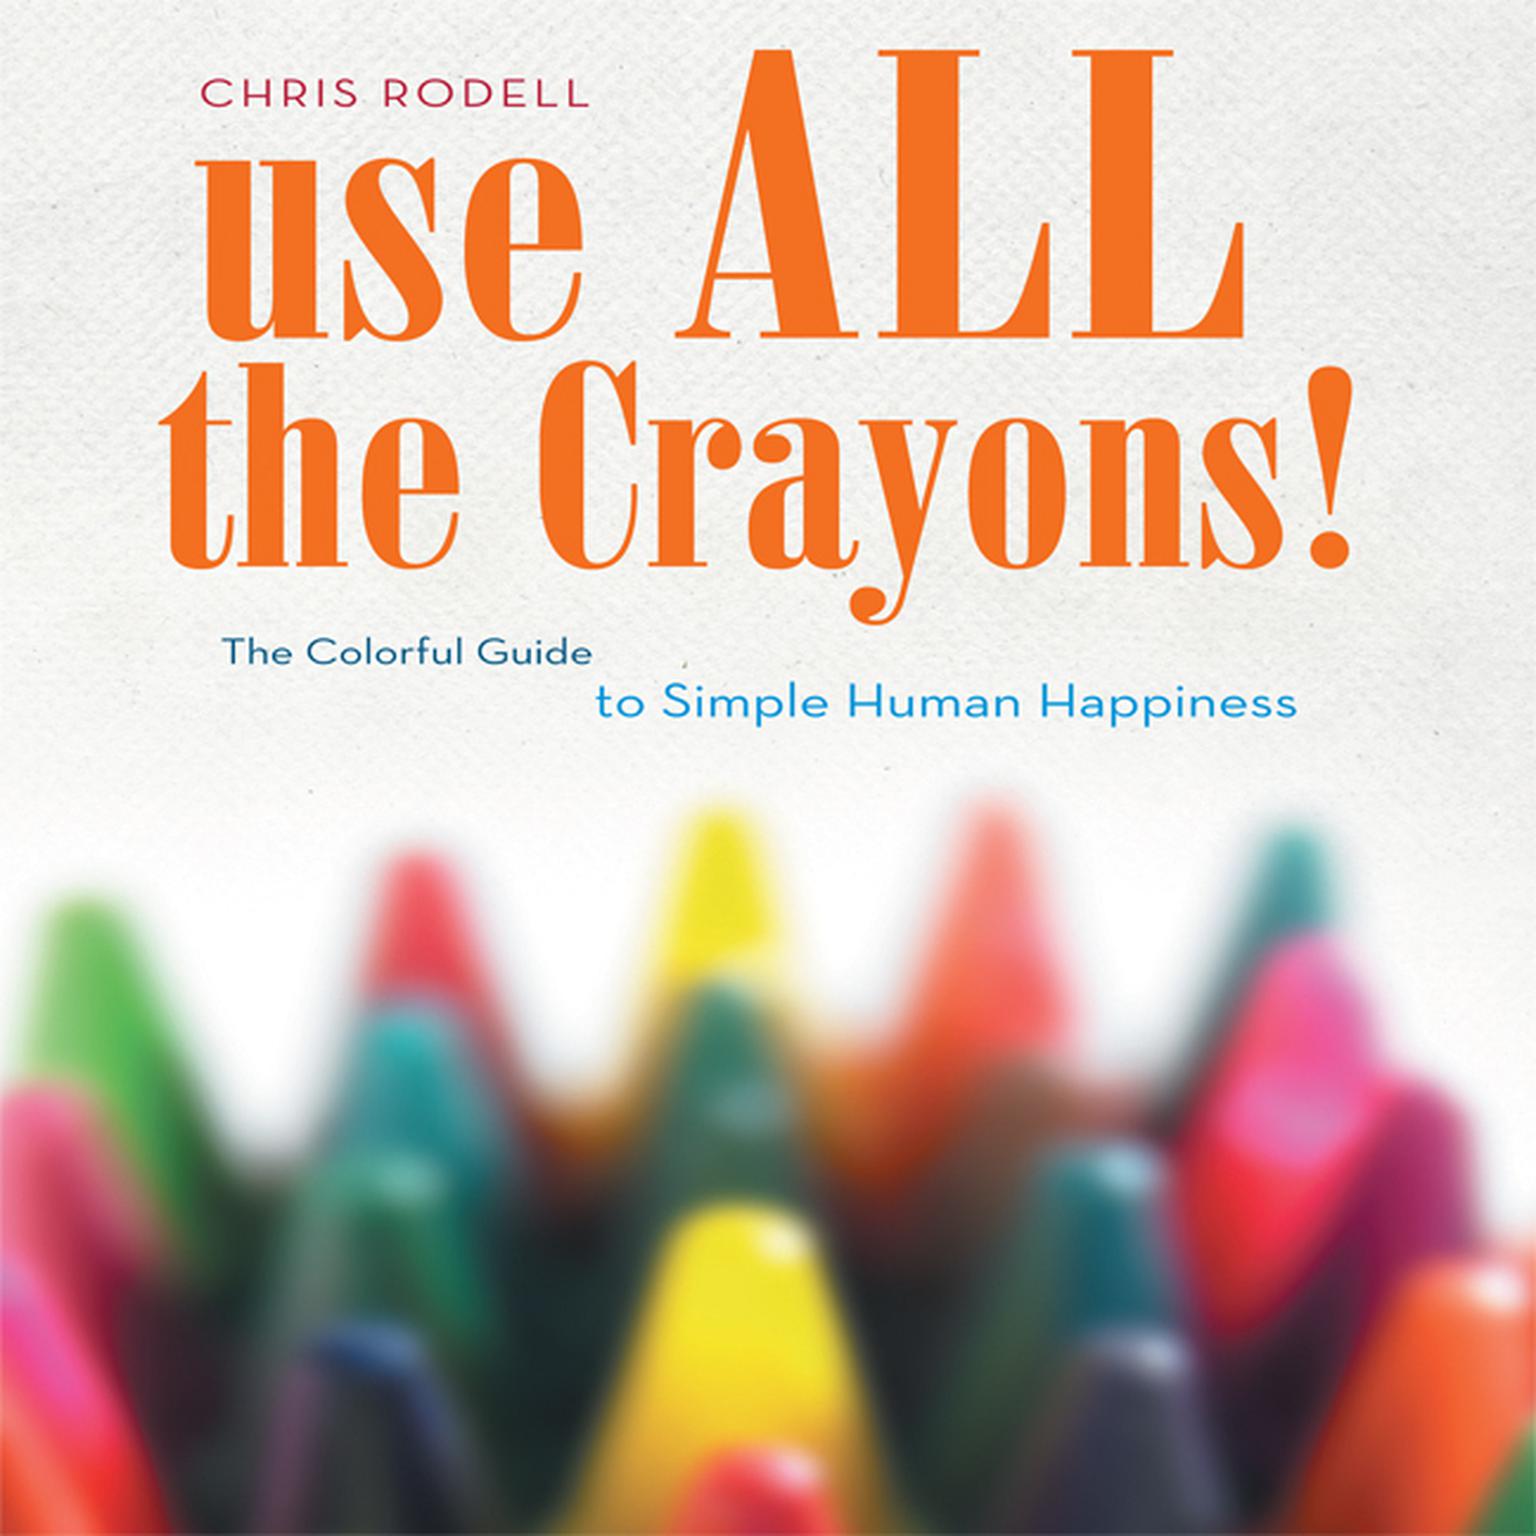 Use All the Crayons!: A Colorful Guide To Simple Human Happiness Audiobook, by Chris Rodell